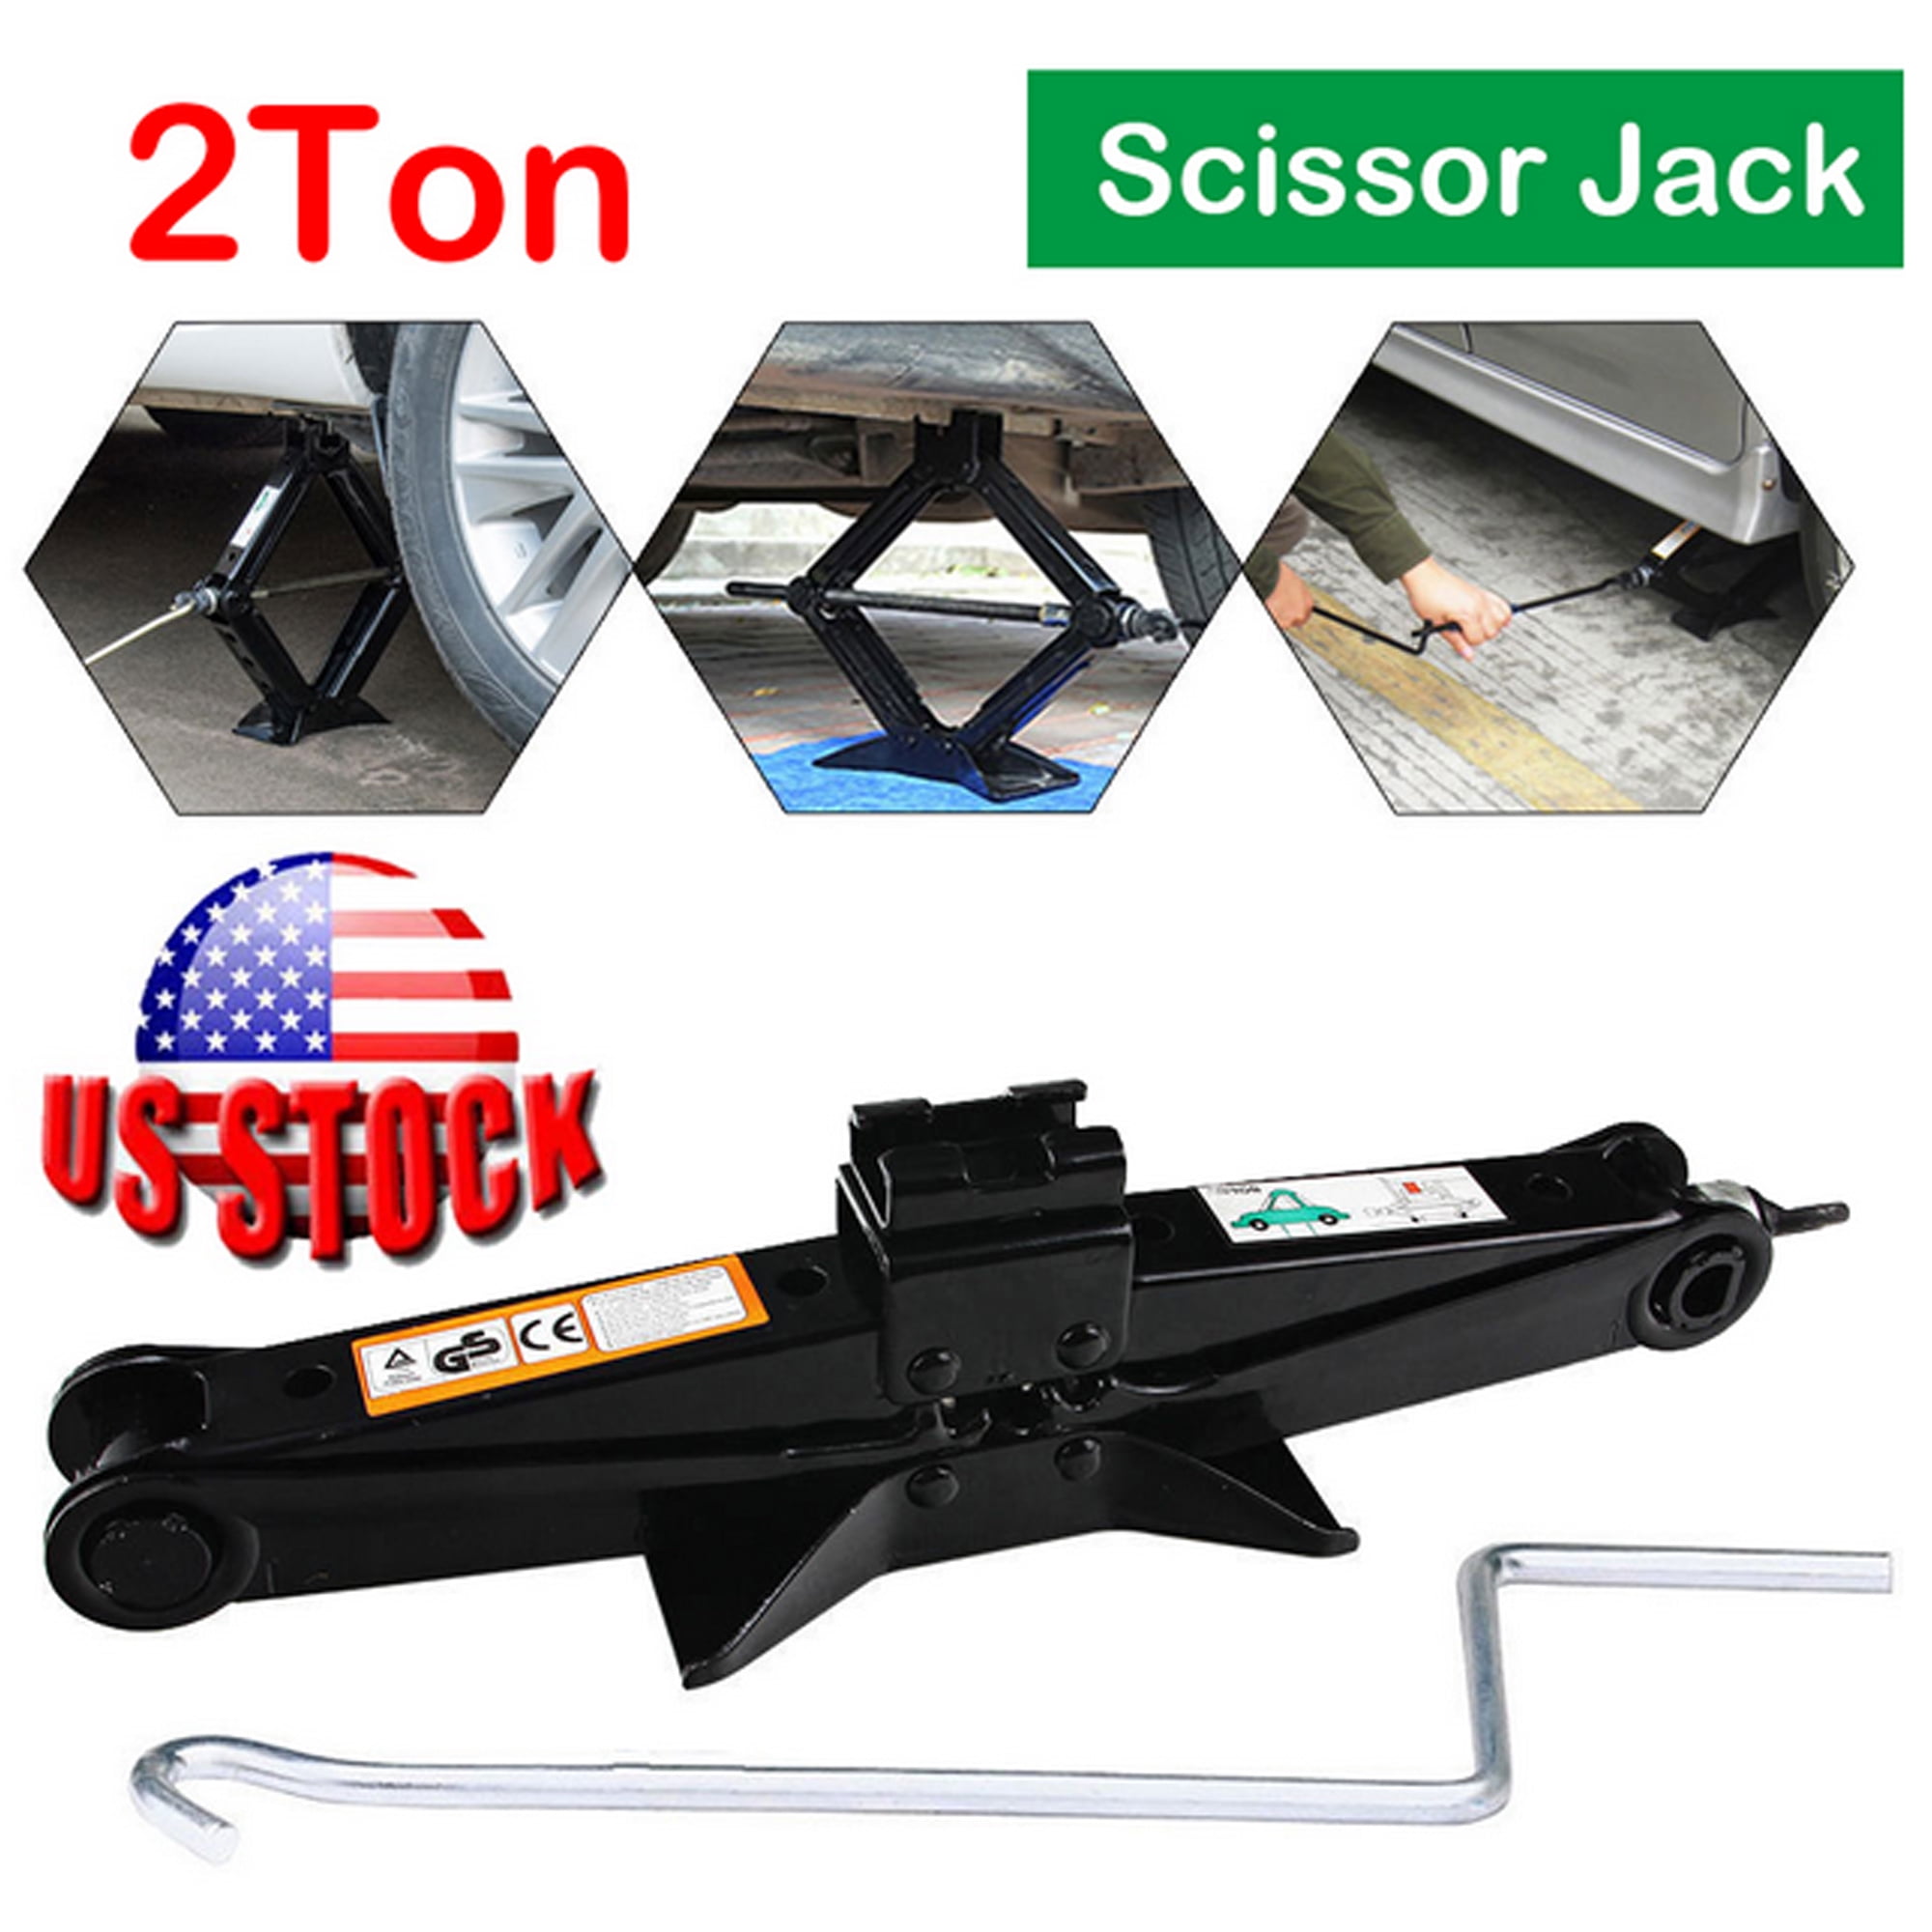 Most Small and Medium Sized Vehicles Adjustable Height From 105mm to 385mm 2 Ton Scissor Jack Wind Up Lift Jack with Speed Handle for Car Van 